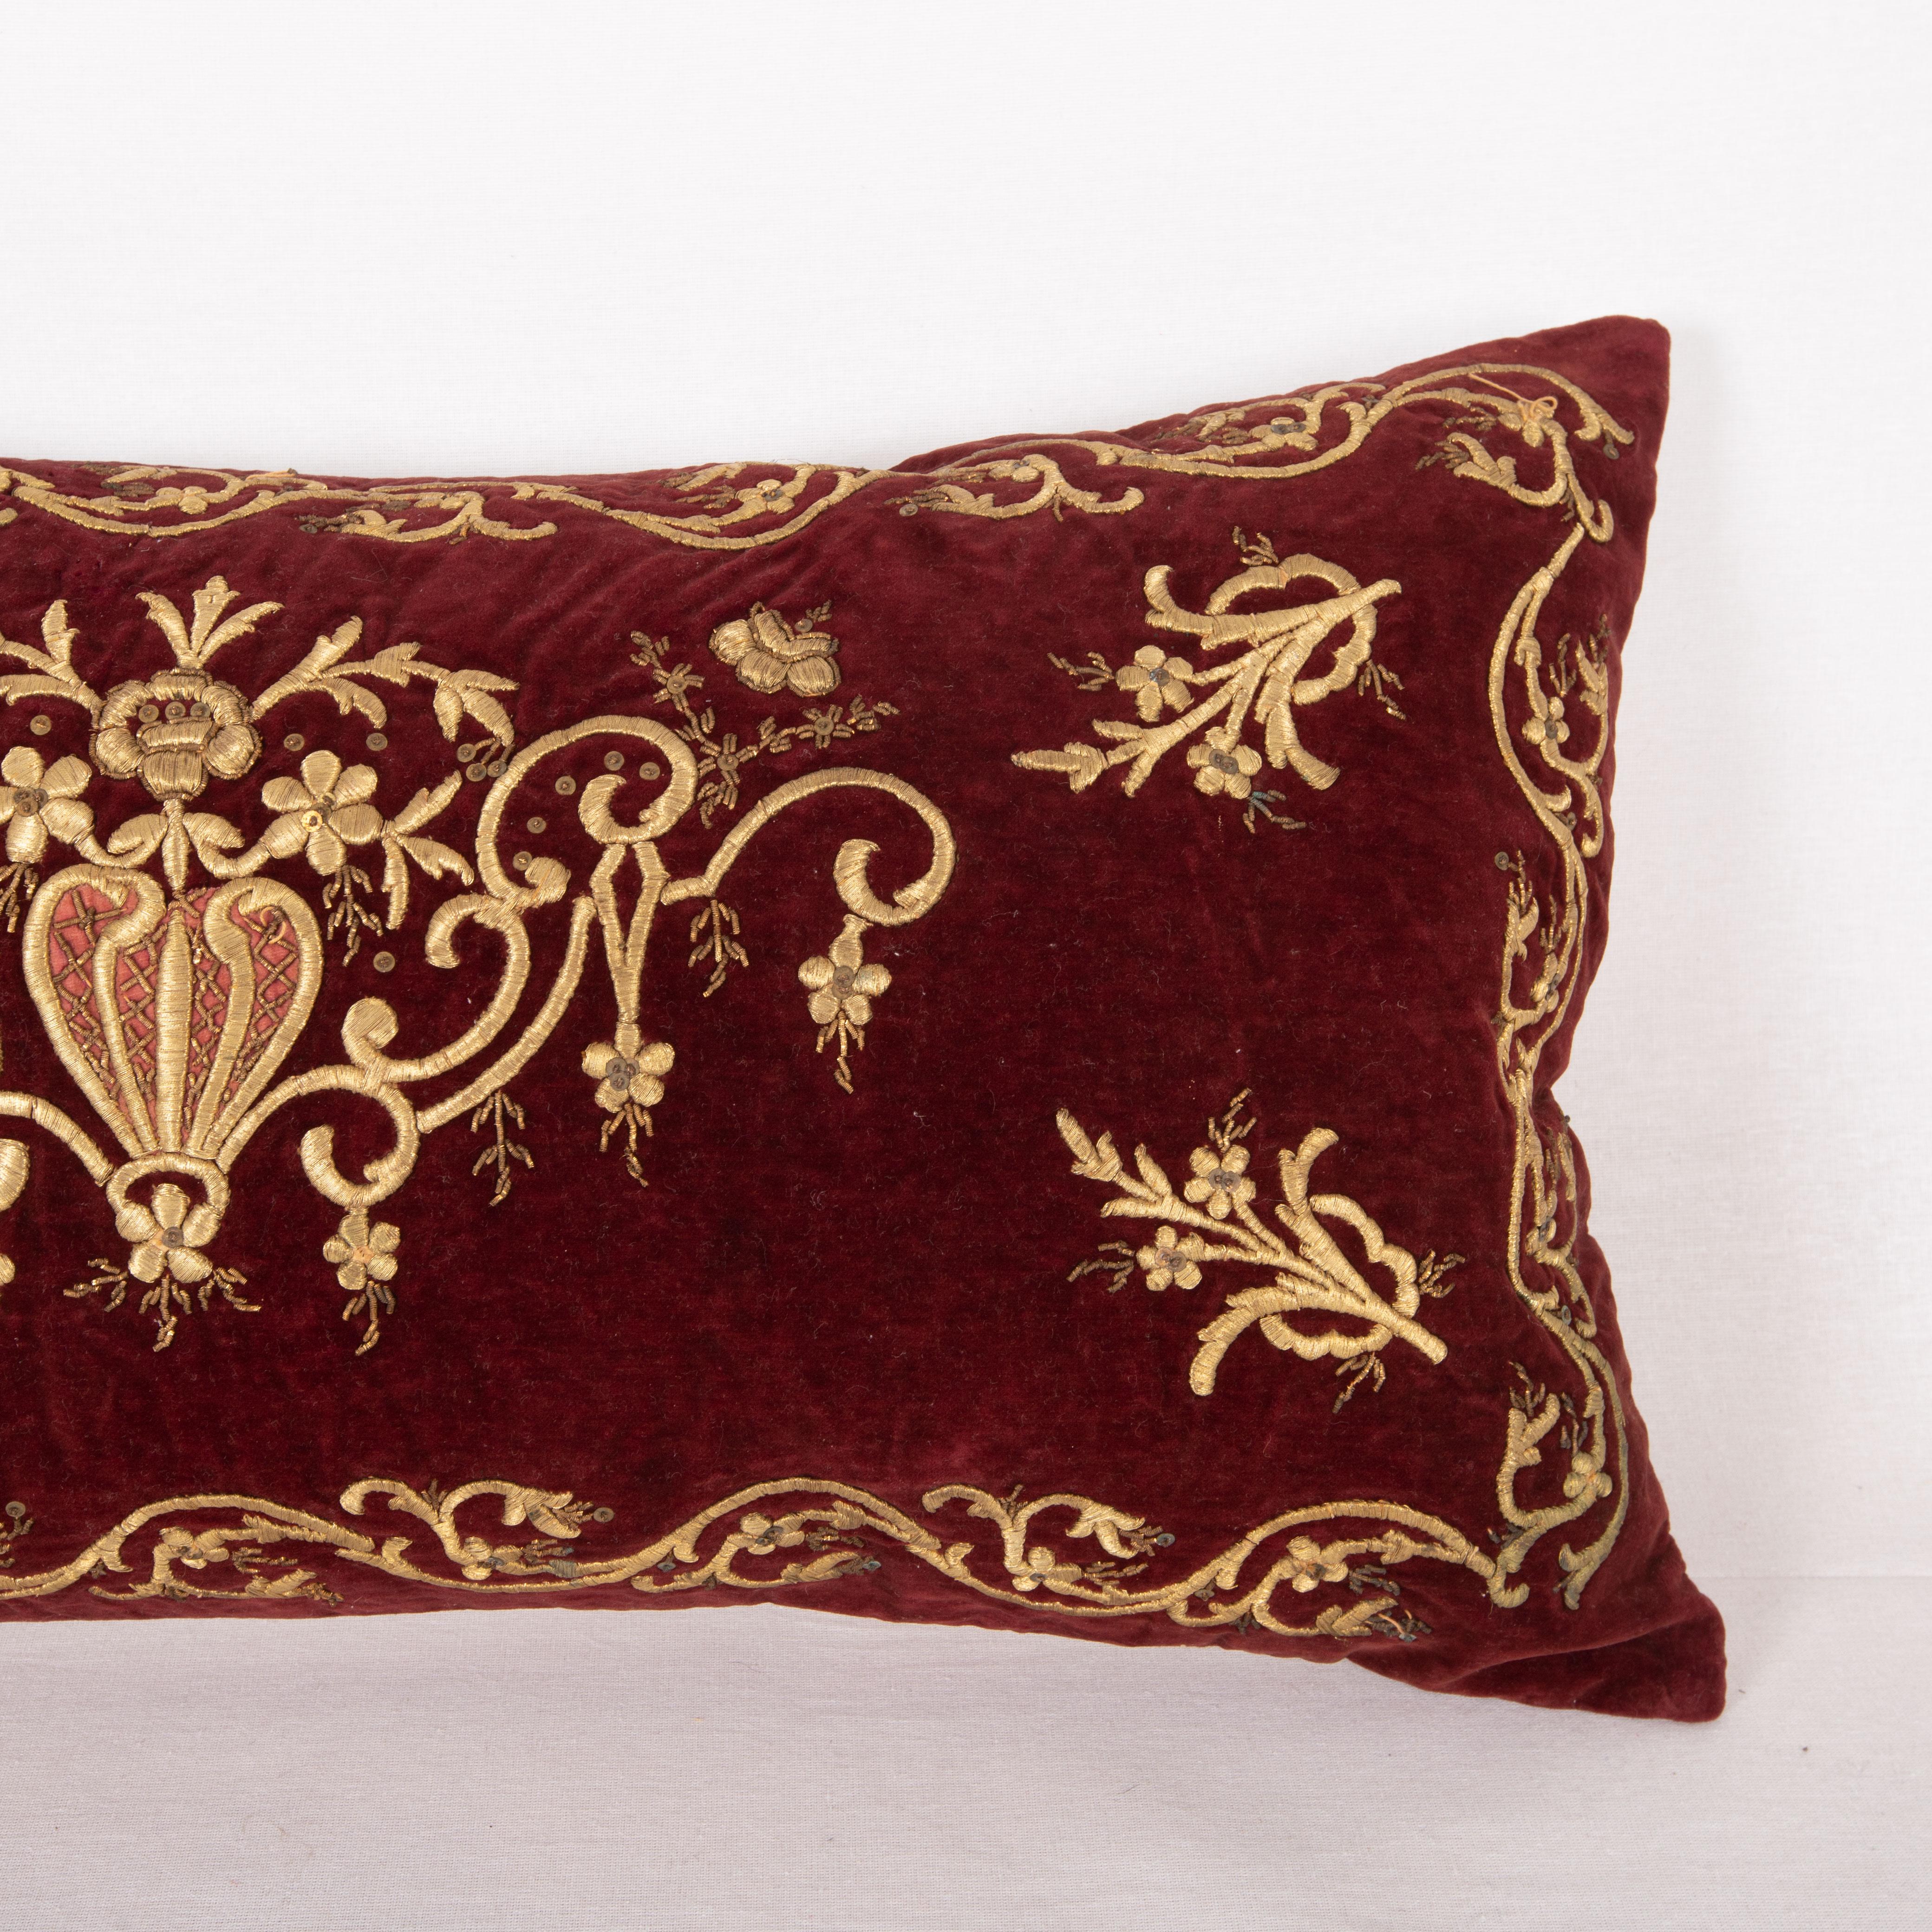 Antique Silk Velvet Ottoman Sarma Pillow Cover, L 19th C. In Good Condition For Sale In Istanbul, TR